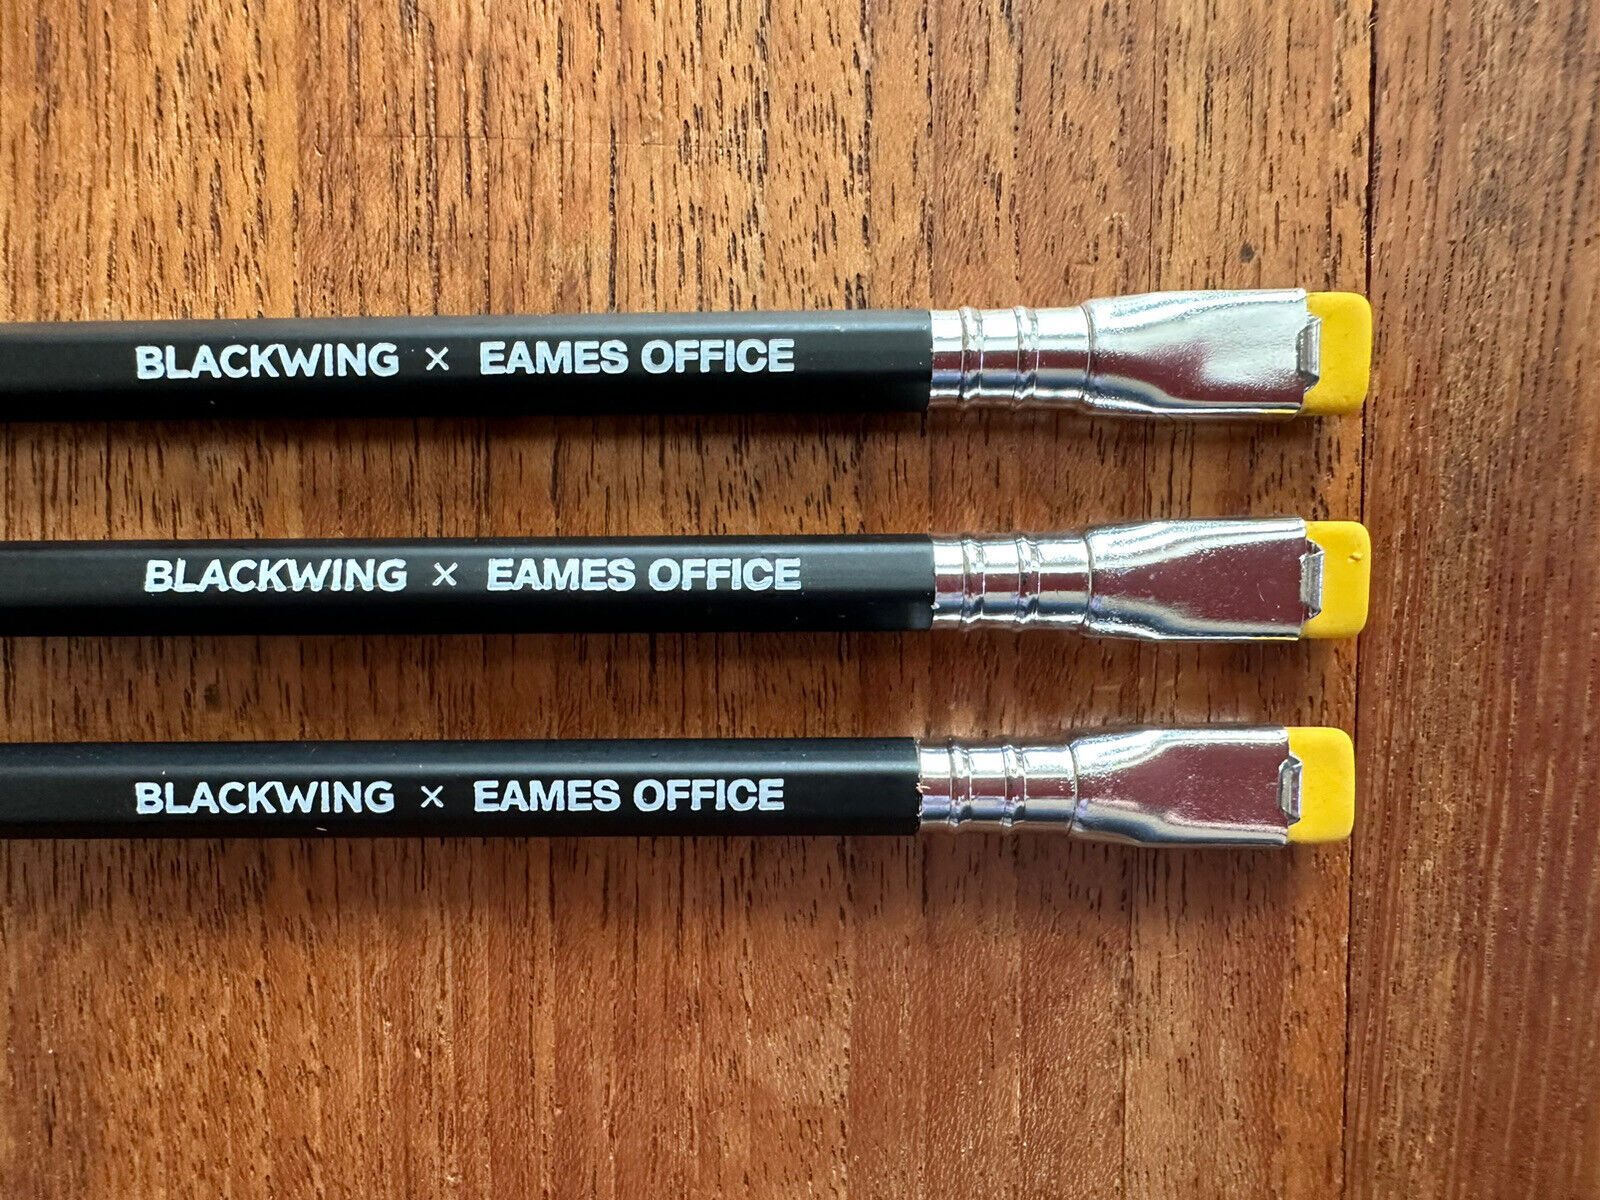 3 Blackwing Eames Office Pencils (Box Not Included)